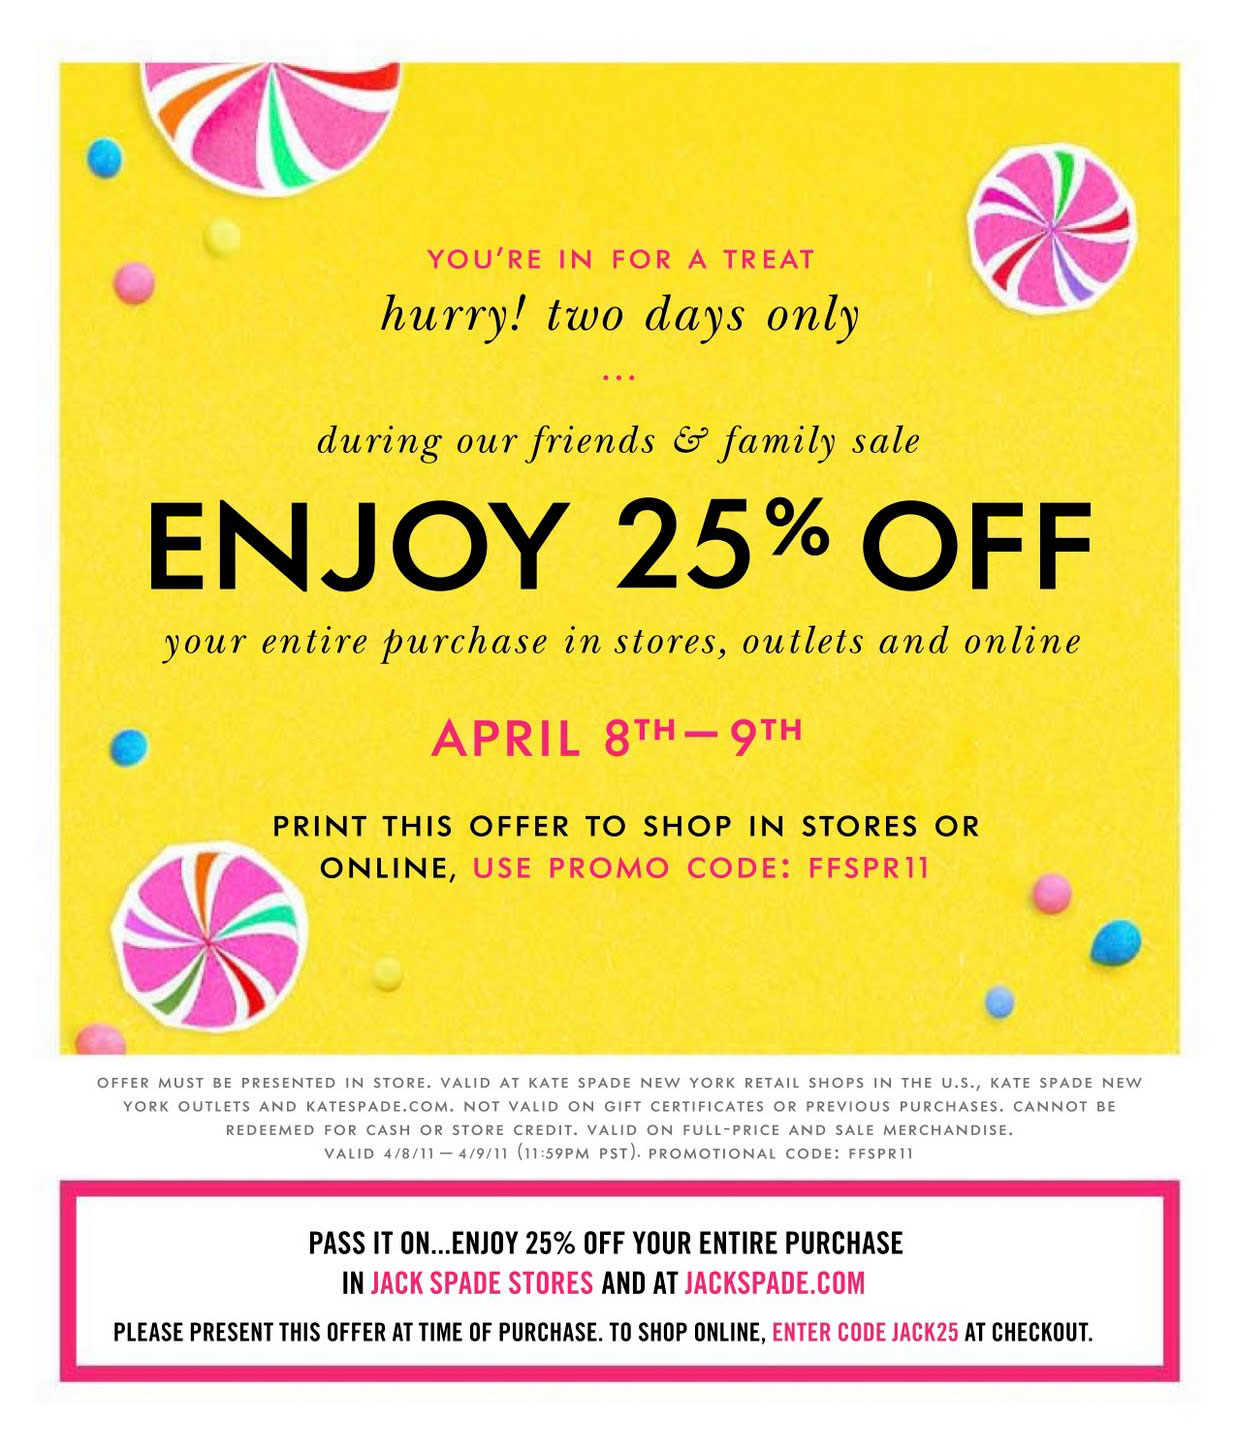 New York Sample Sales - Kate Spade Friends and Family Sale